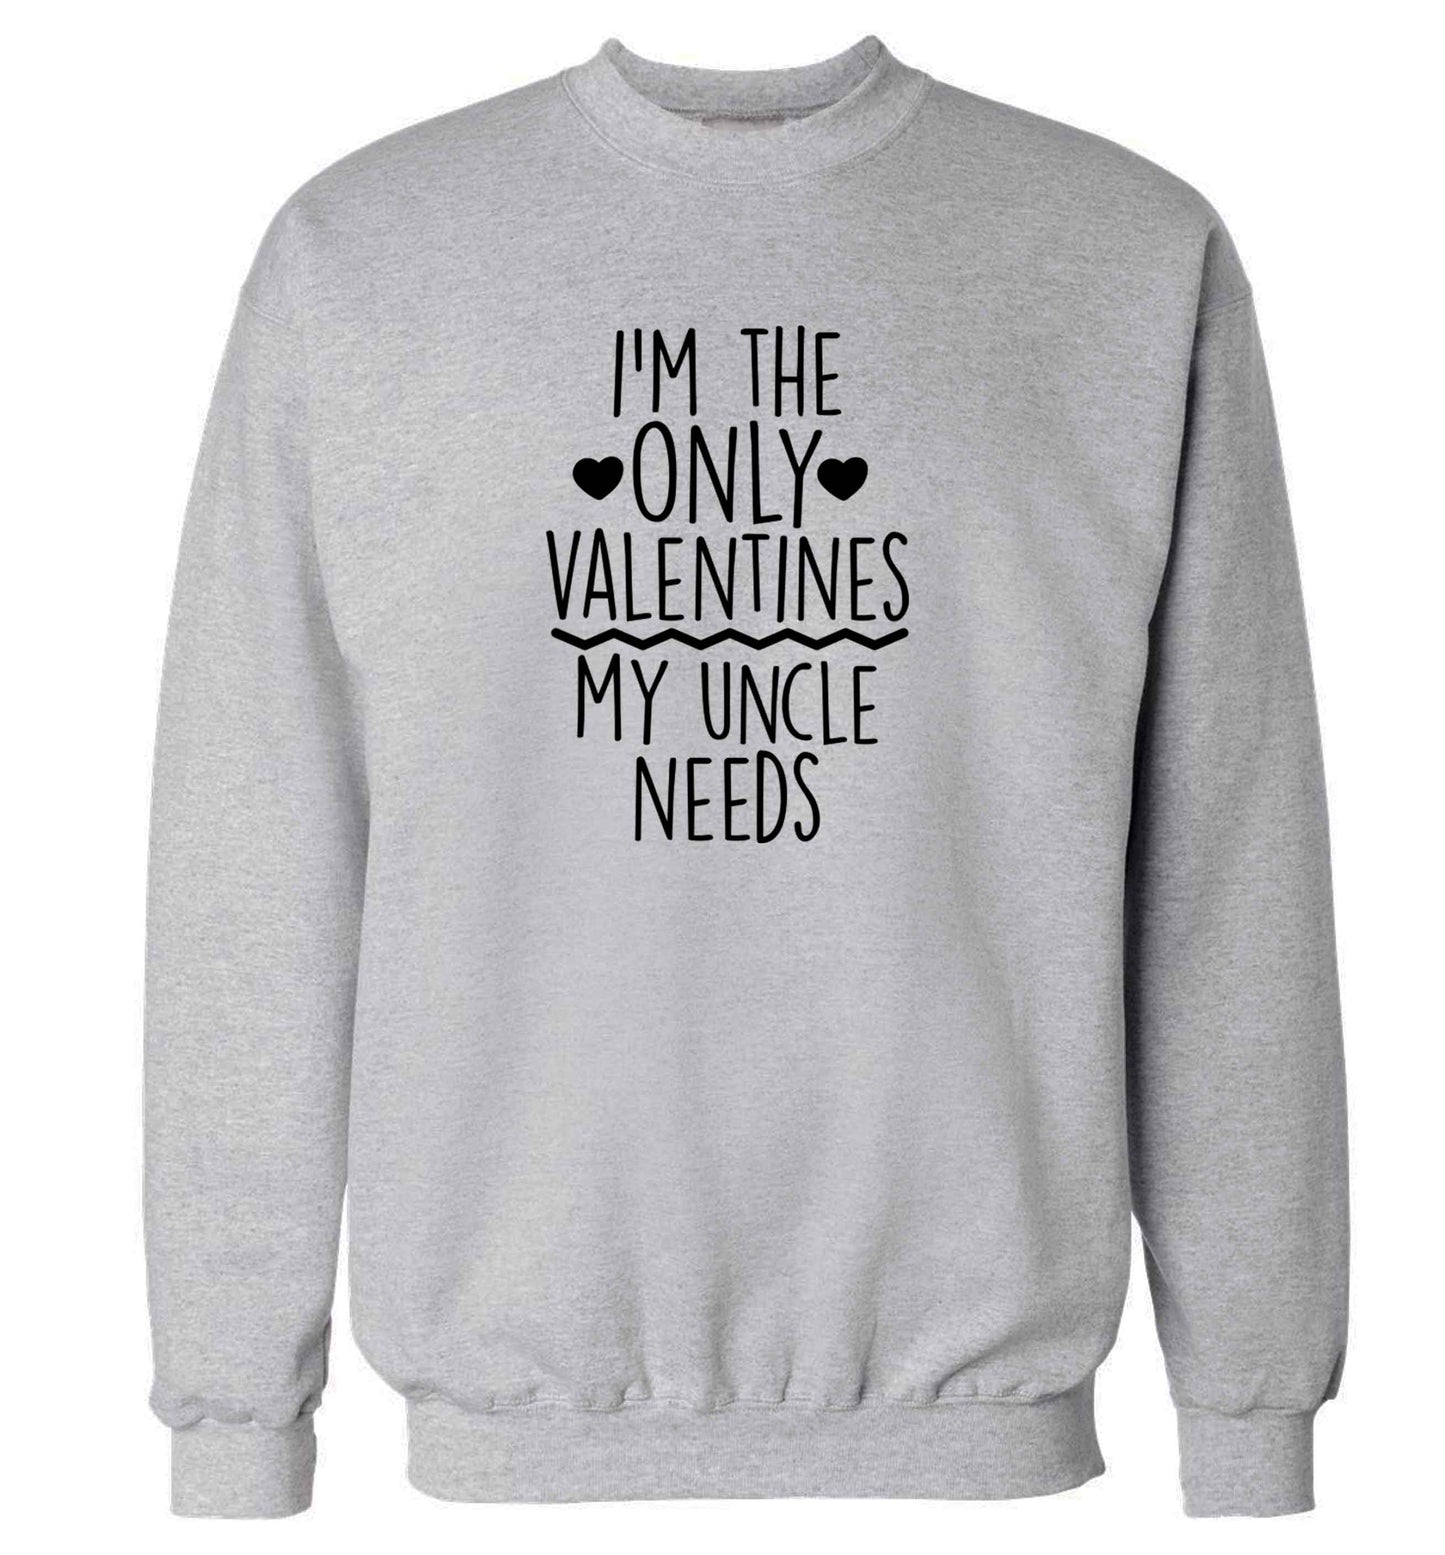 I'm the only valentines my uncle needs adult's unisex grey sweater 2XL